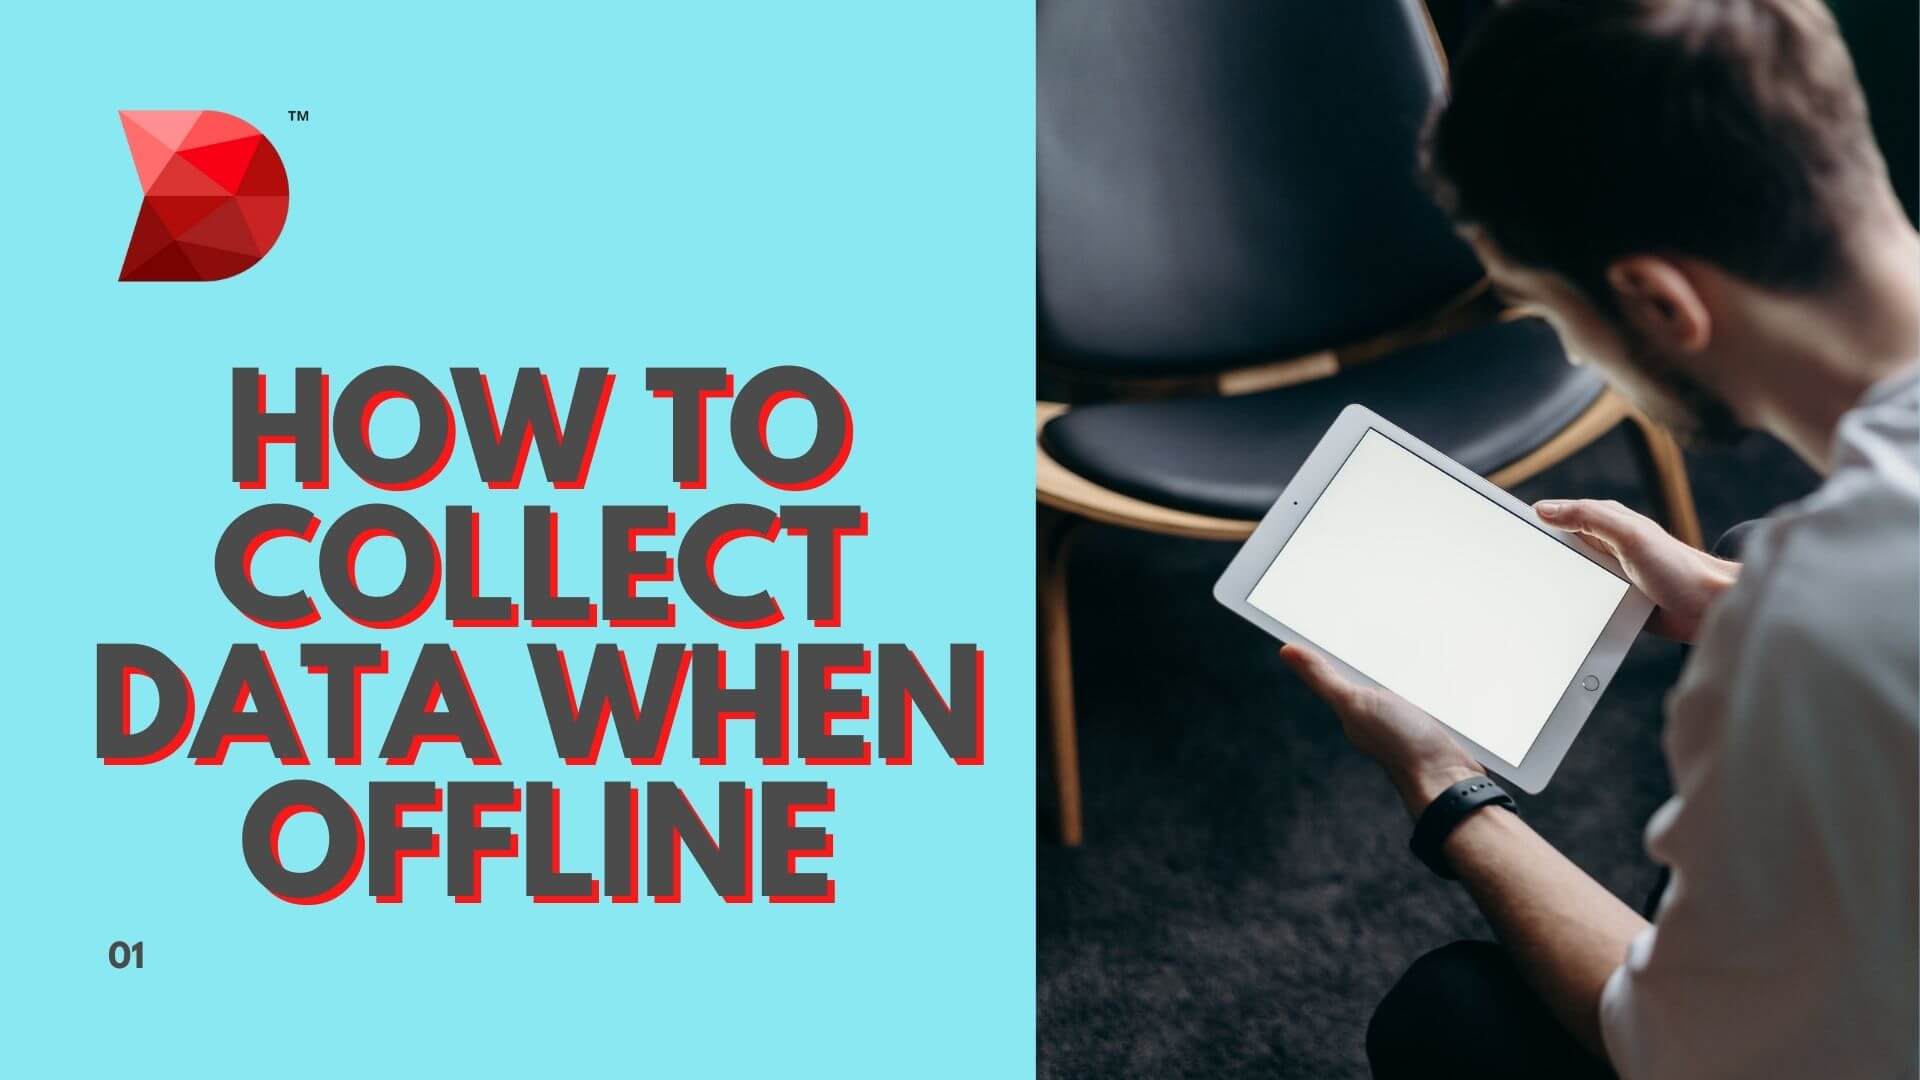 How to Collect Data When Offline